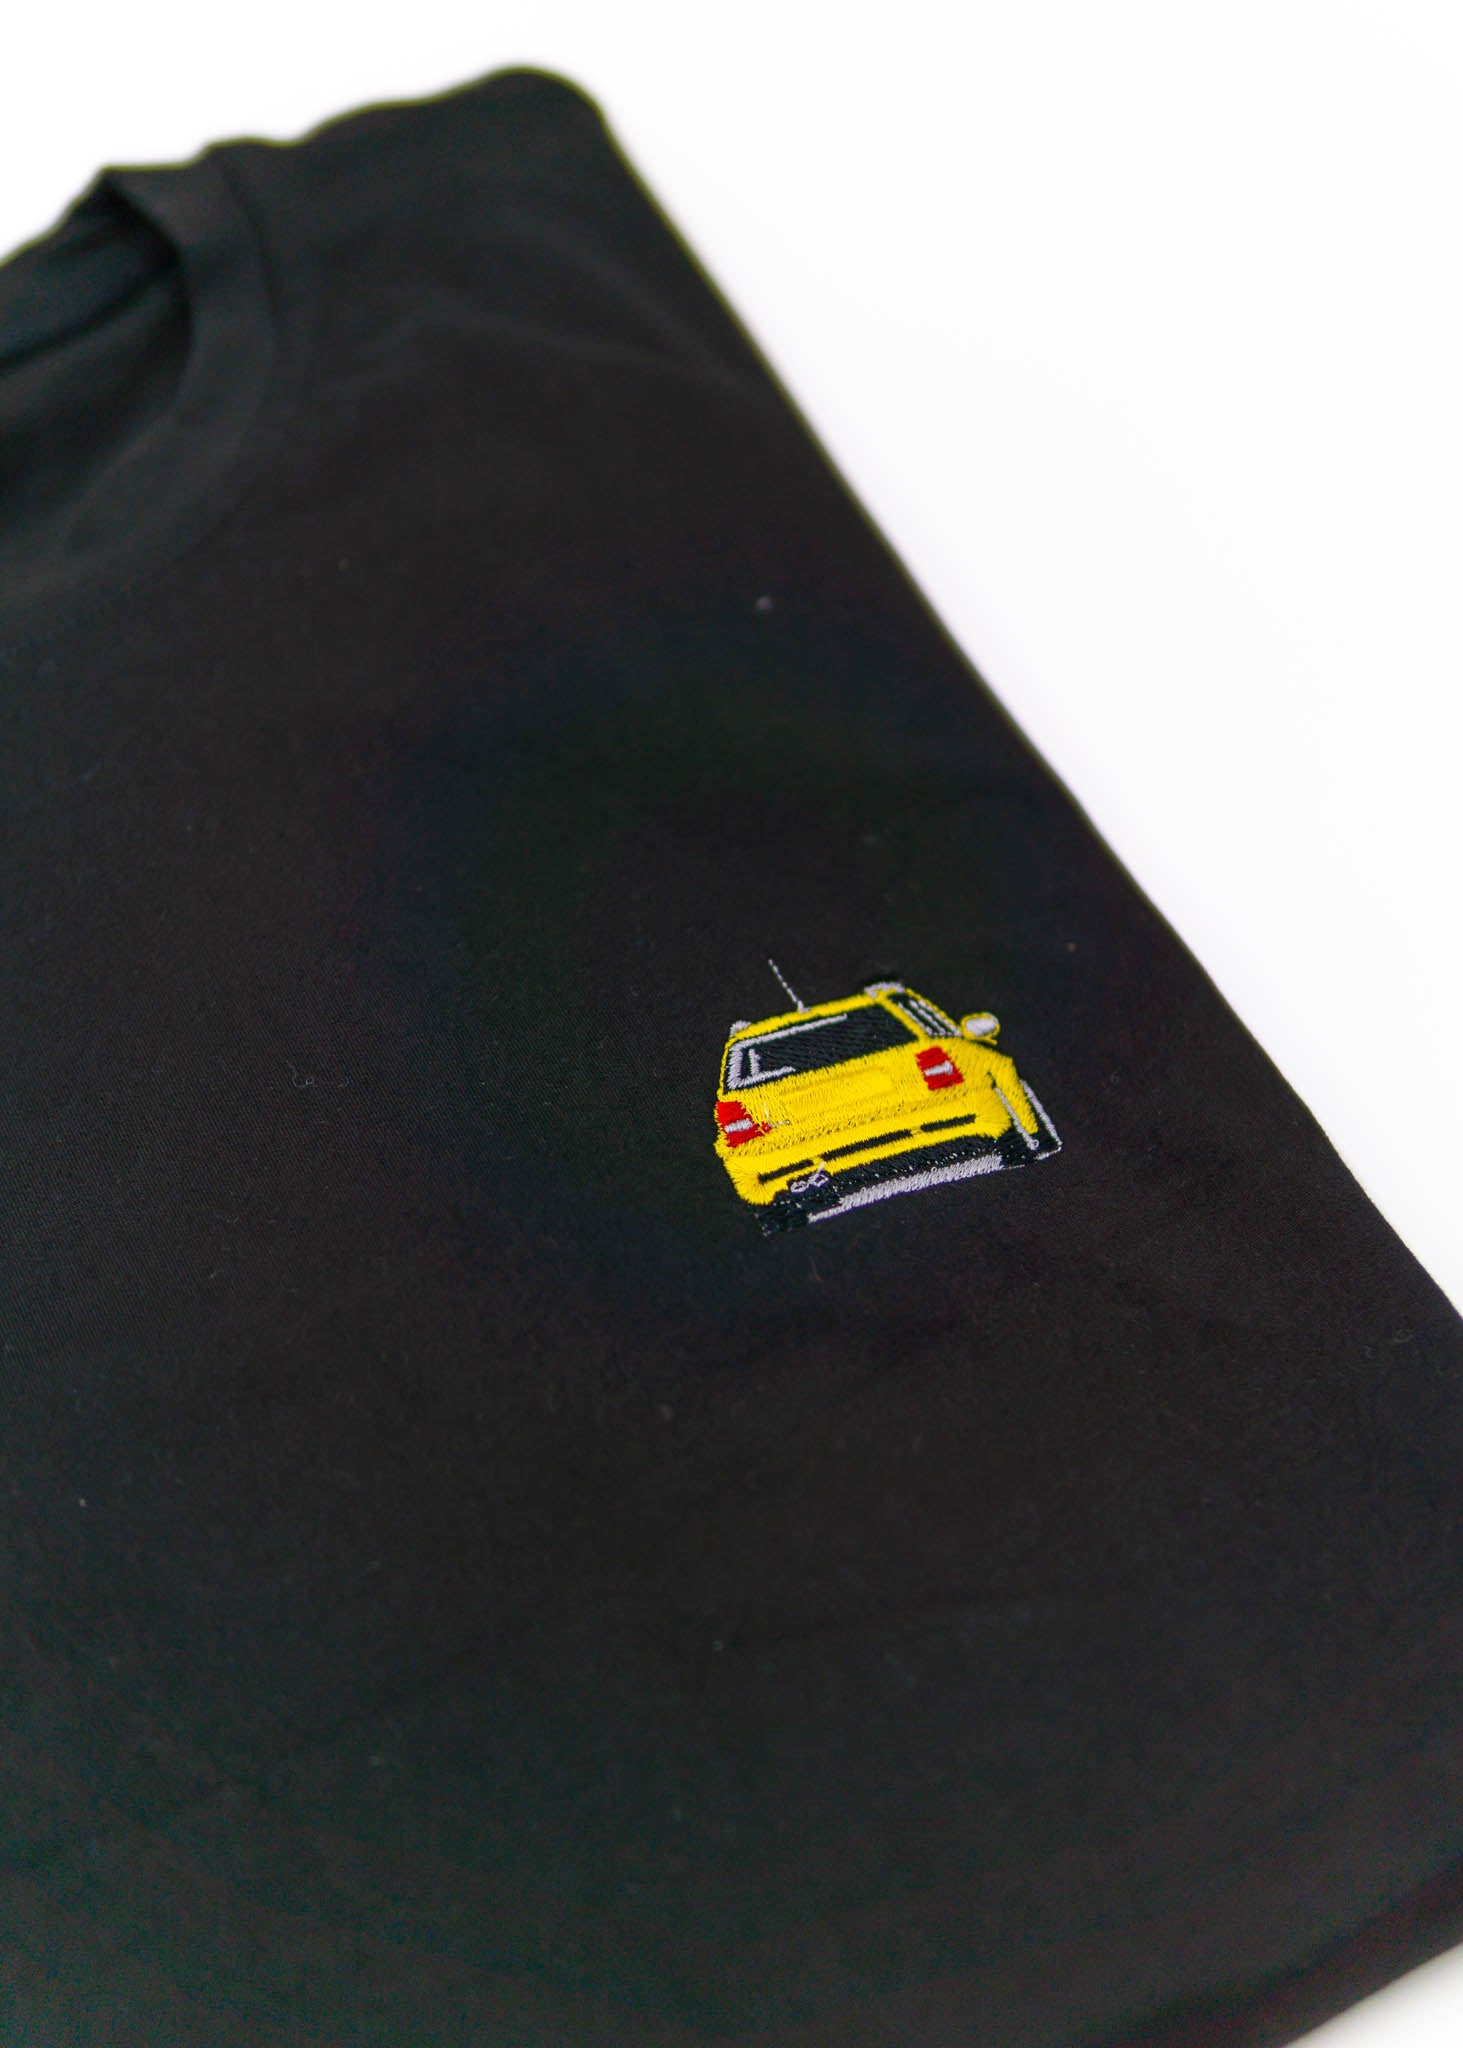 A black Audi t-shirt for men. Photo is a close up view of the shirt with an embroidered Imola Yellow Audi B5 RS4. Fabric composition is polyester, and cotton. The material is very soft, stretchy, non-transparent. The style of this shirt is short sleeve, with a crewneck neckline.